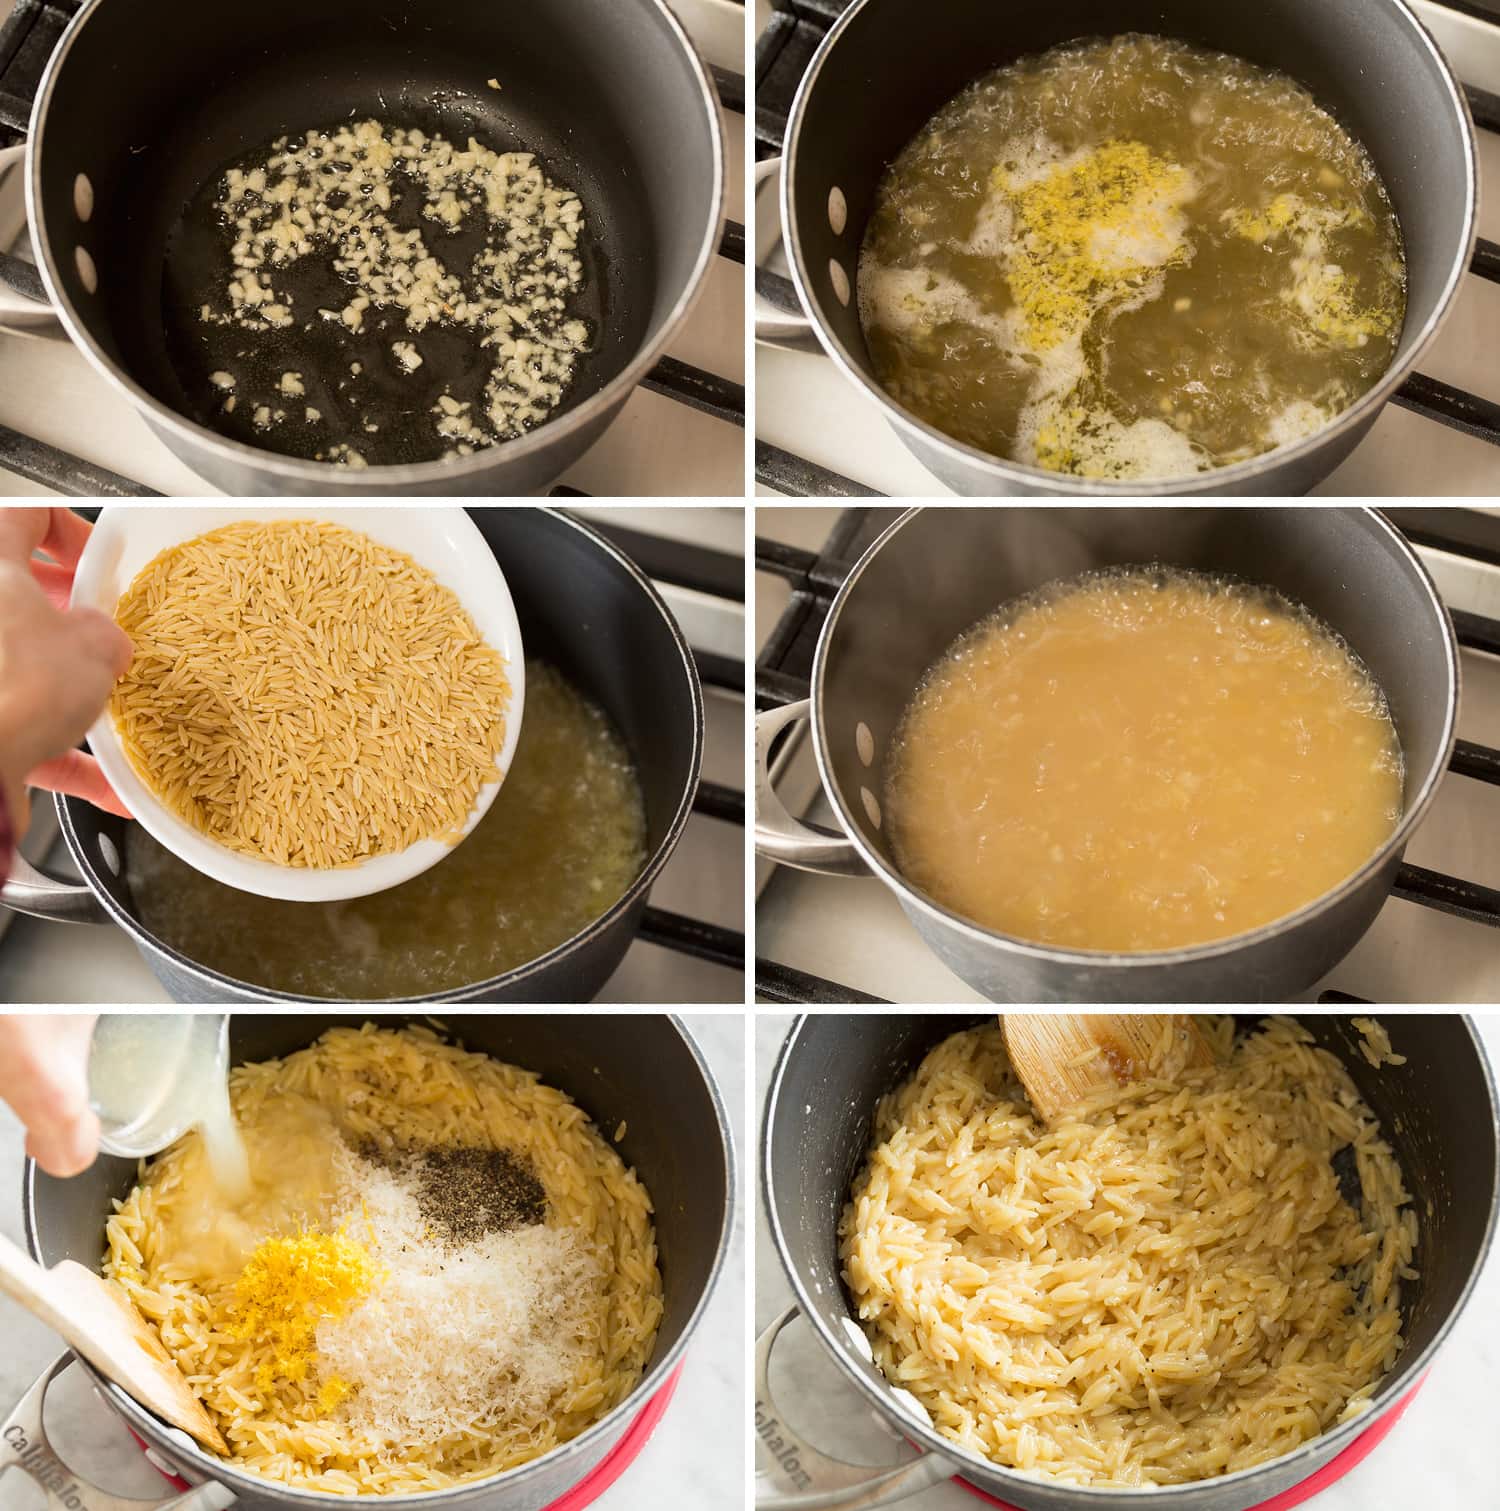 Steps showing how to make lemon orzo recipe in a saucepan on the stovetop.